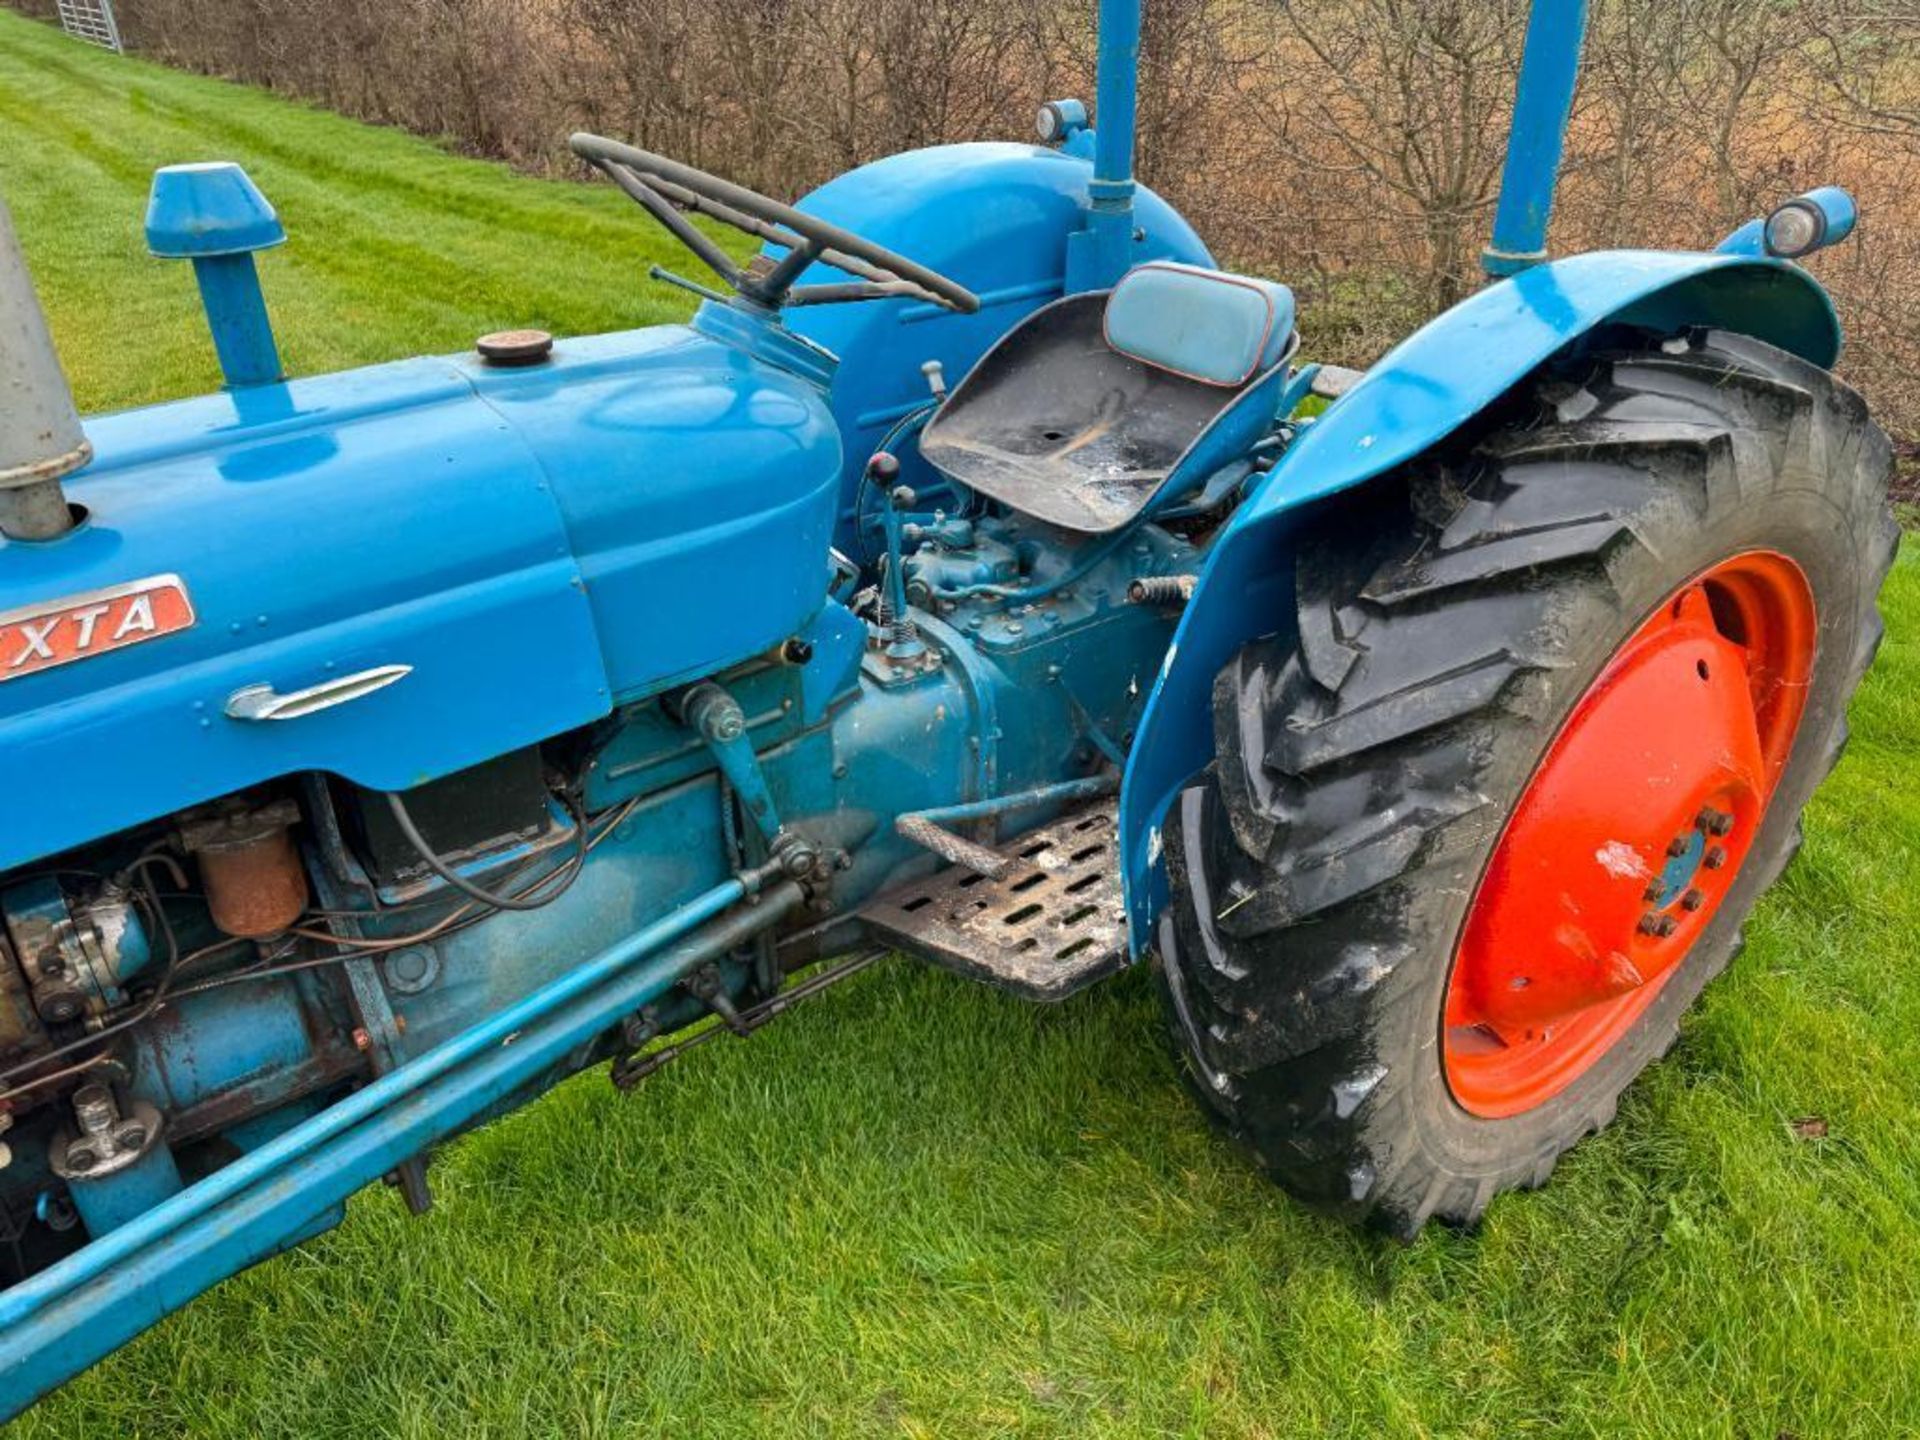 1962 Fordson Dexta 2wd diesel tractor with pick up hitch, rear linkage and rollbar on 12.4/11-28 rea - Image 14 of 14